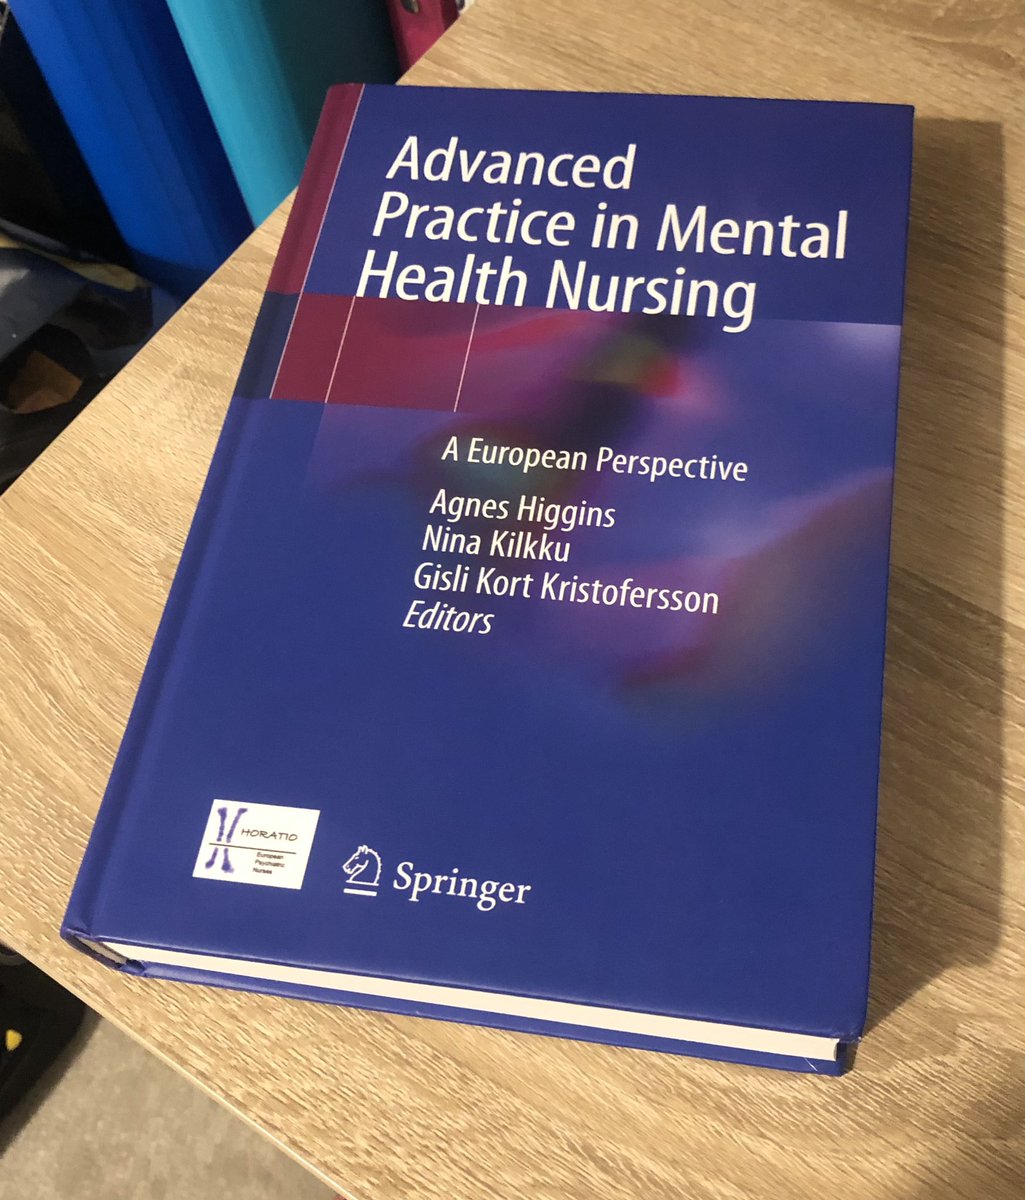 Overjoyed to find this text!! Can’t recommended it enough! Thank you for this text @Cillmurry @NinaKilkku and colleagues 👏🏼👏🏼👏🏼👏🏼 Have you read yours yet @CatherineLNHS ?? 😆 #mentalhealthnursing #advancedpractice